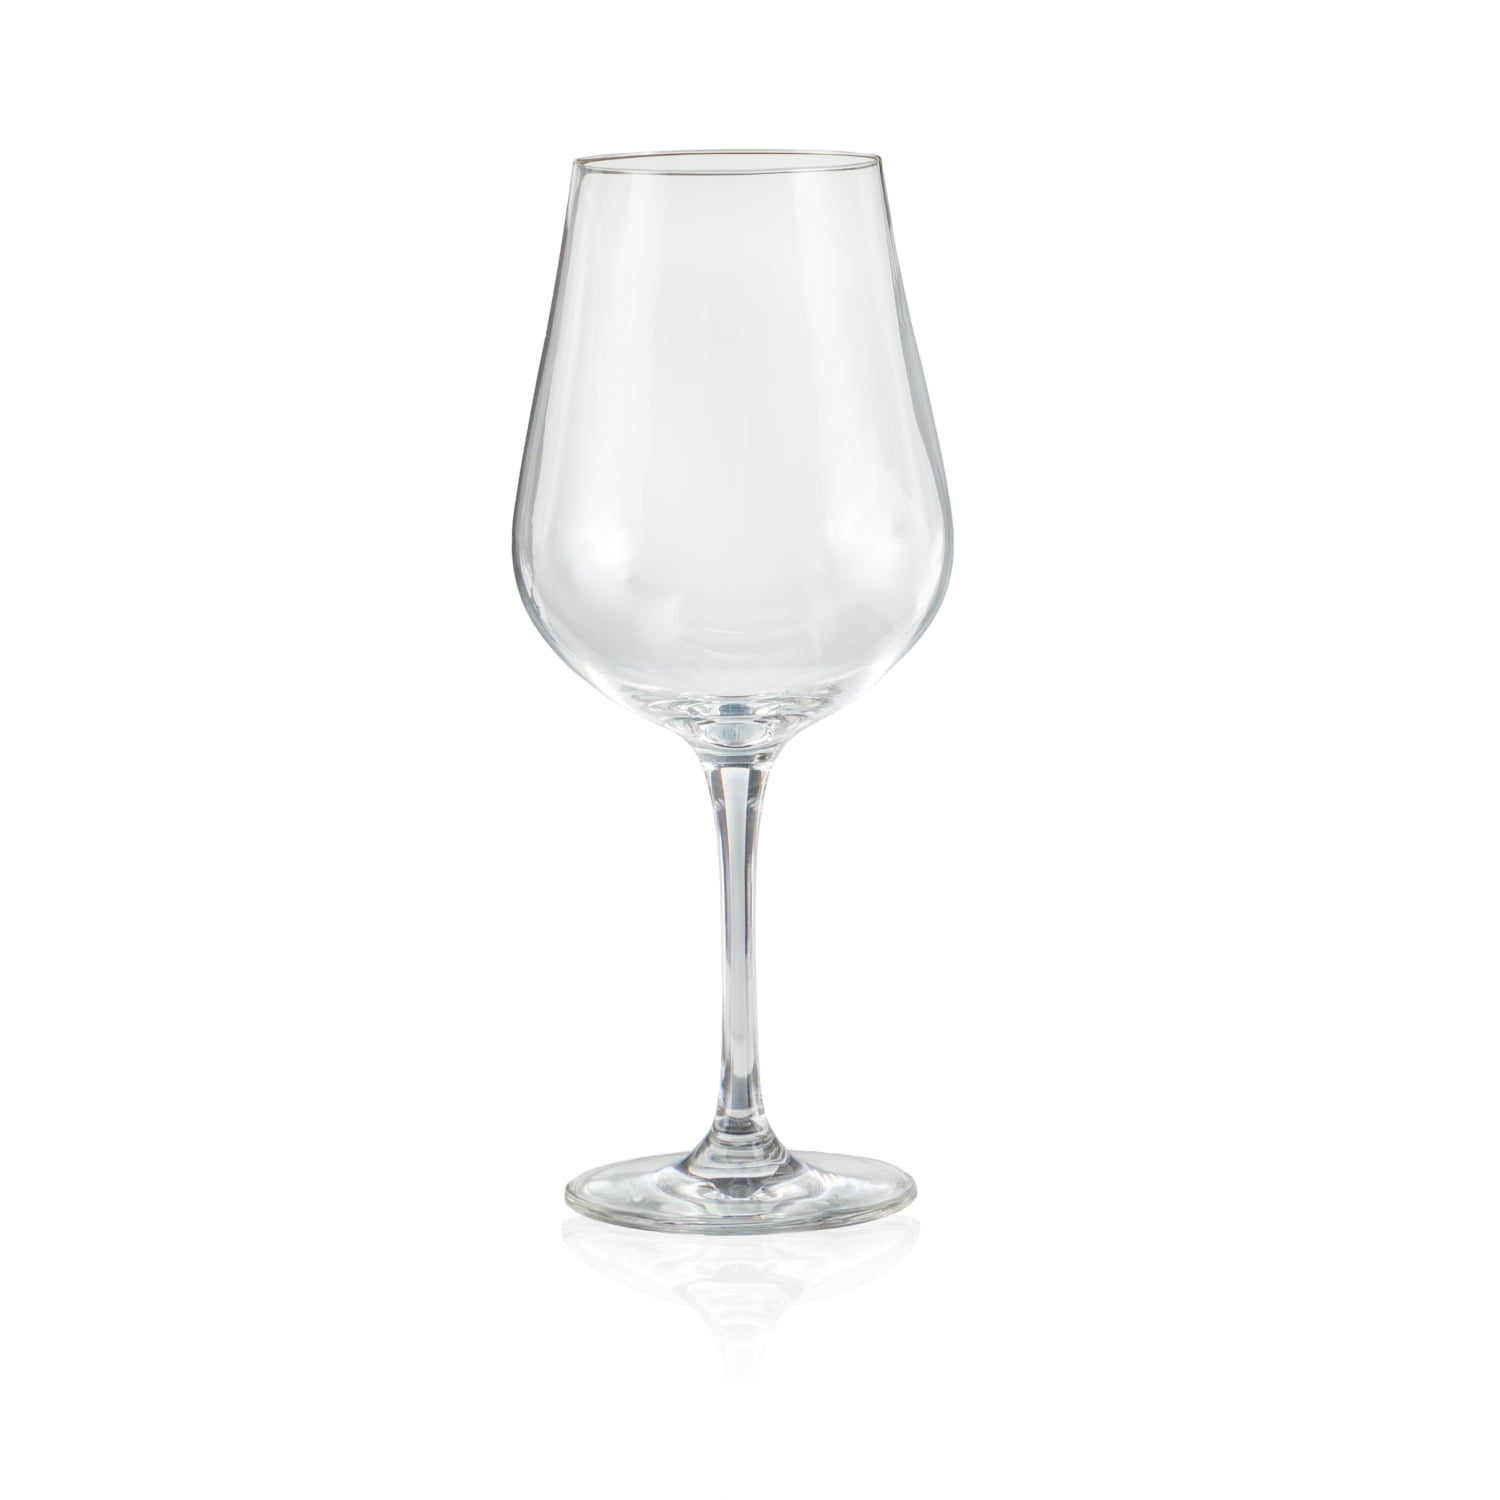 Pair of Schott Zwiesel Canto Champagne Flutes